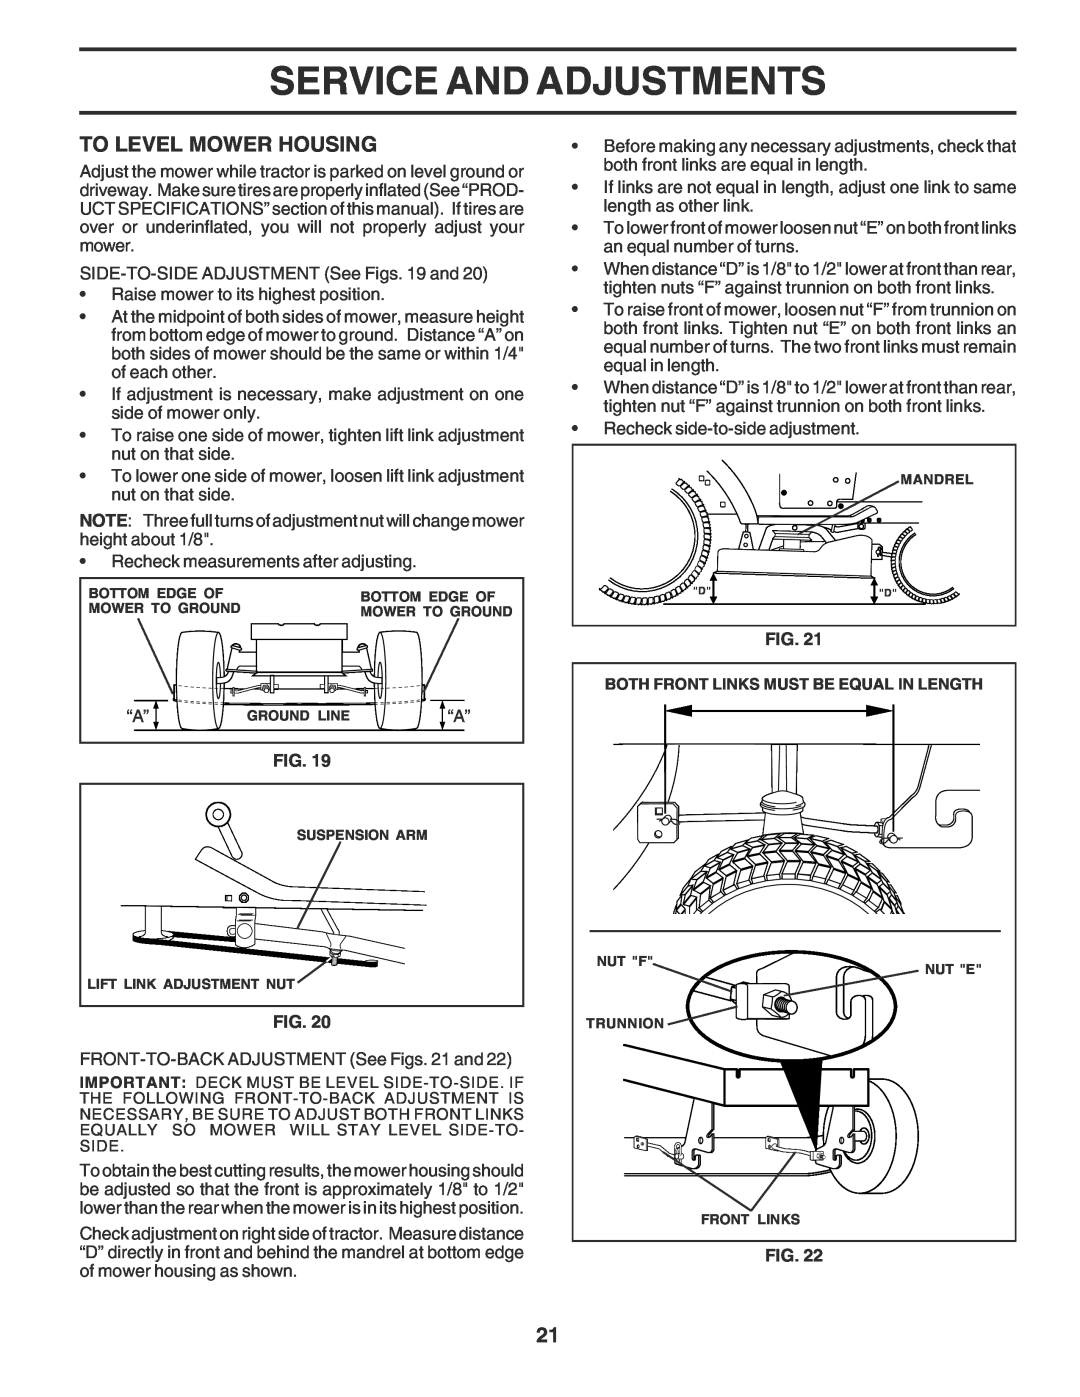 Poulan PPR20H42STC owner manual To Level Mower Housing, Service And Adjustments, Both Front Links Must Be Equal In Length 